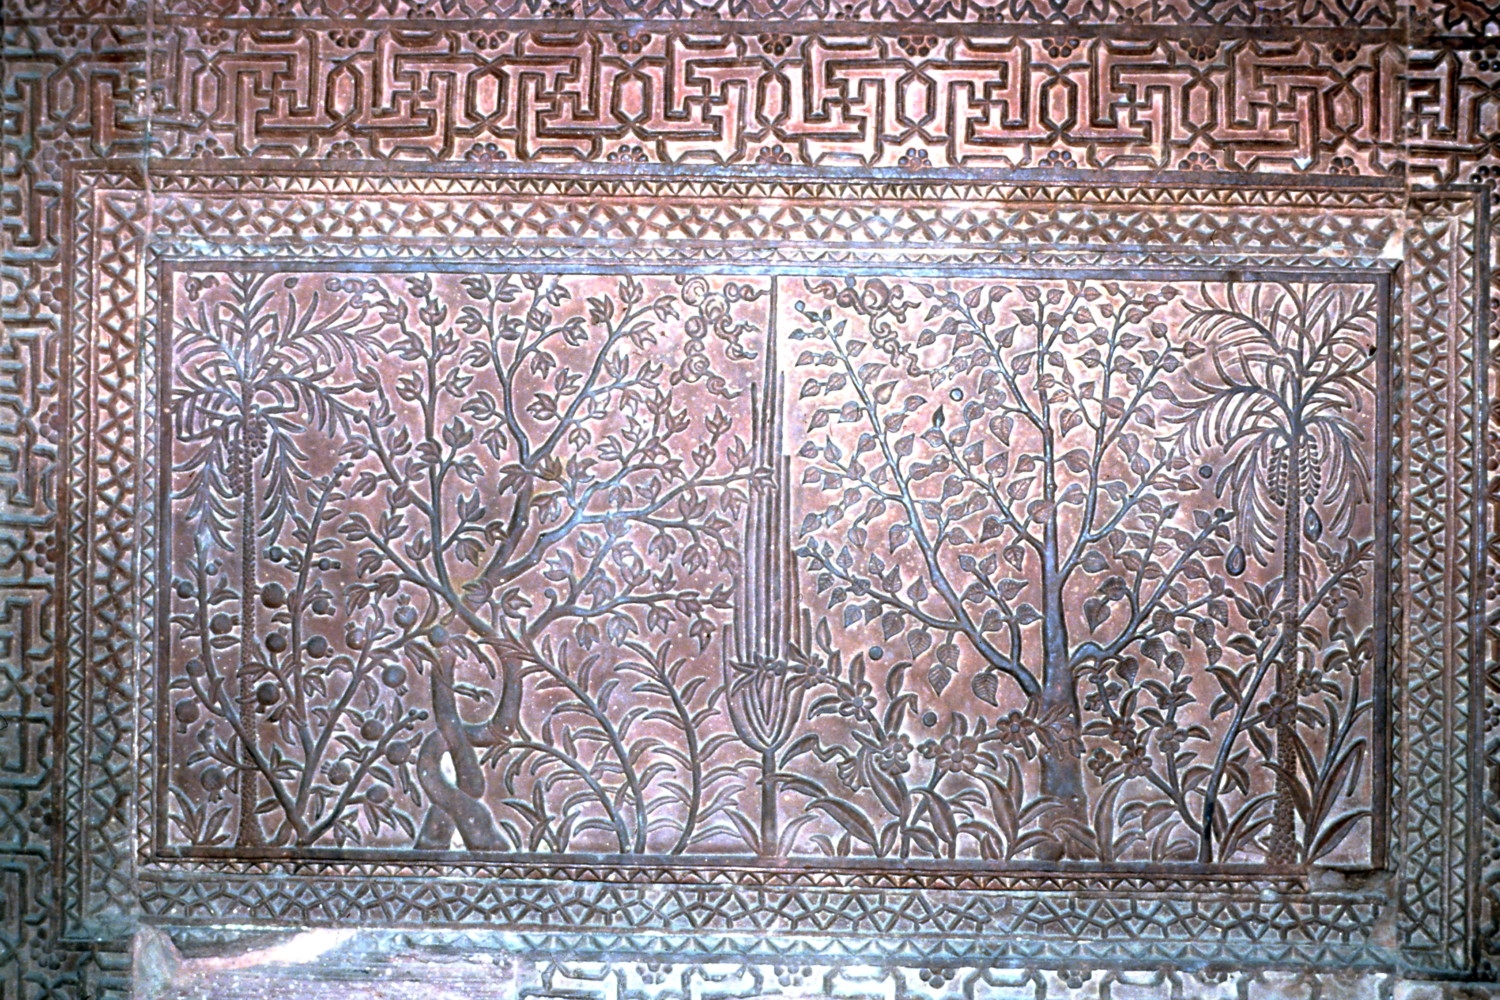 Interior detail of relief, with tree and vegetal motifs